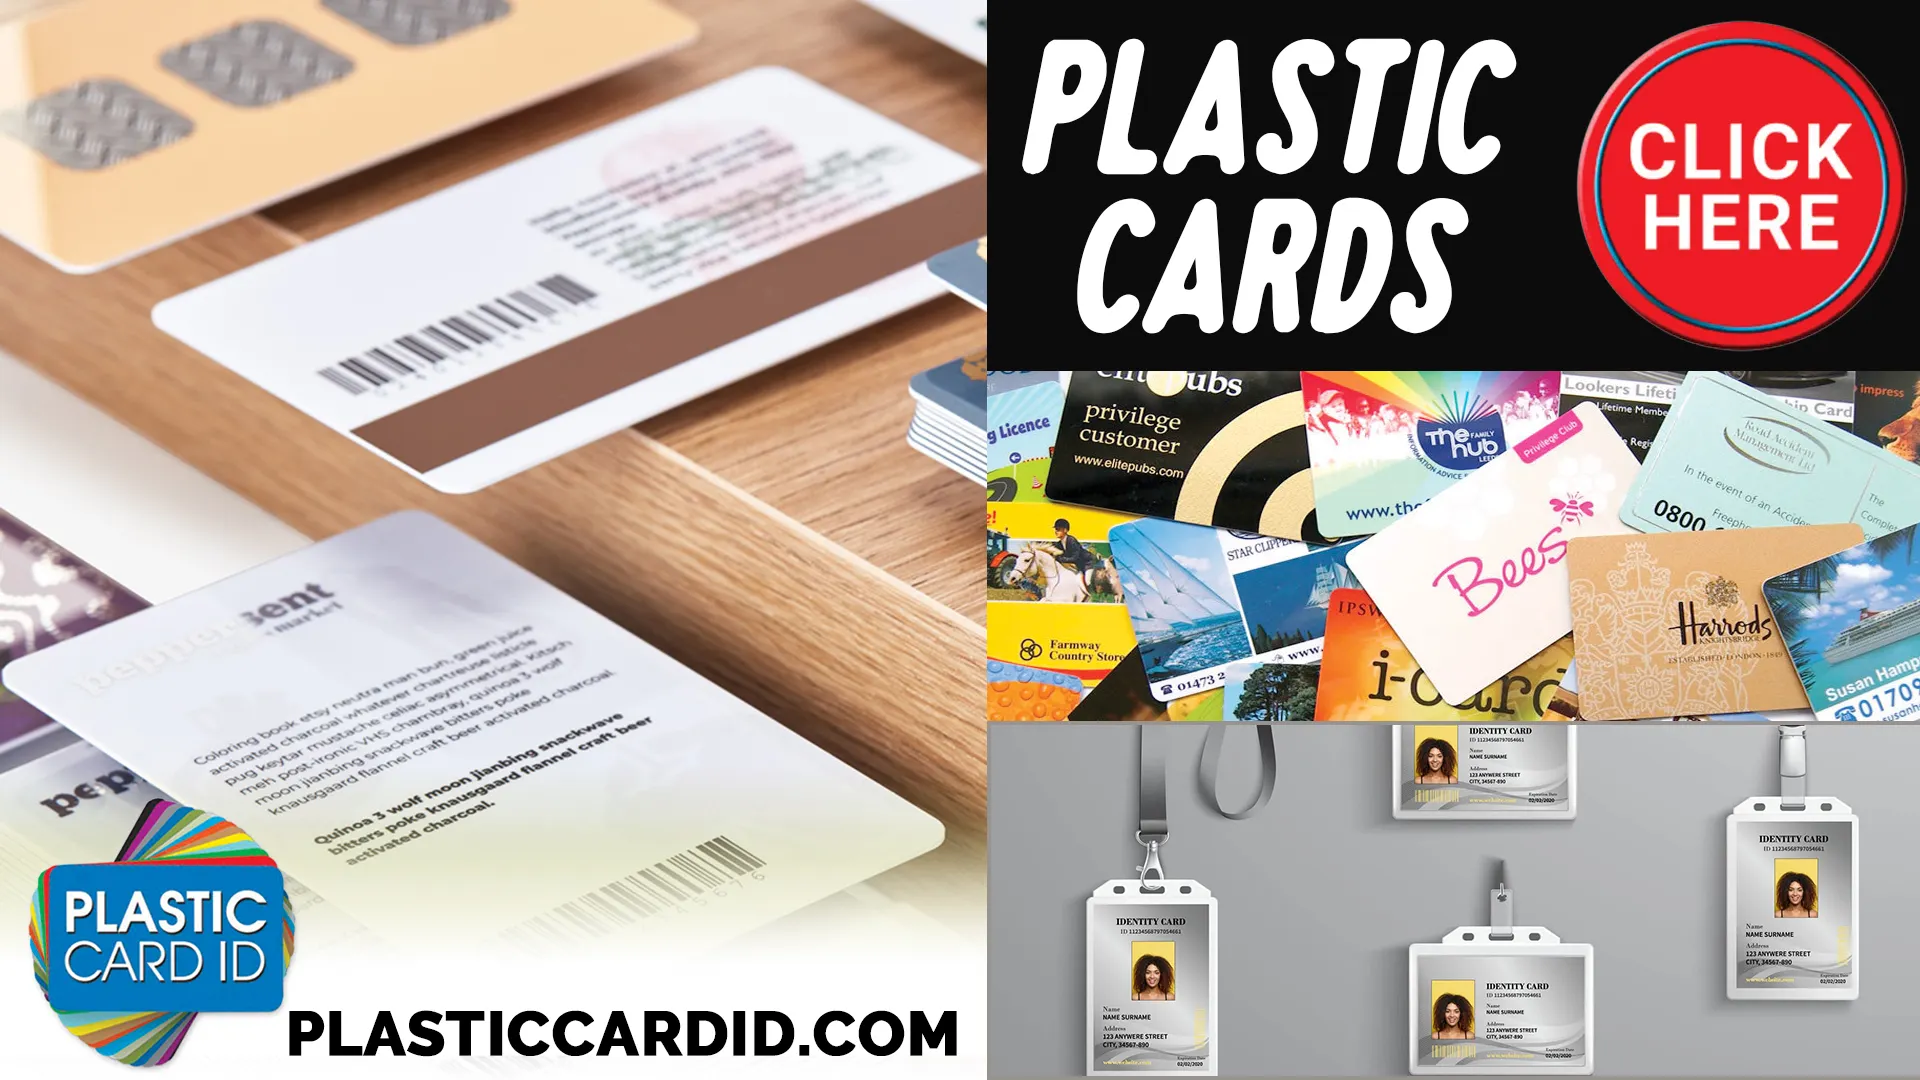 Understanding the Lifecycle of Plastic Cards